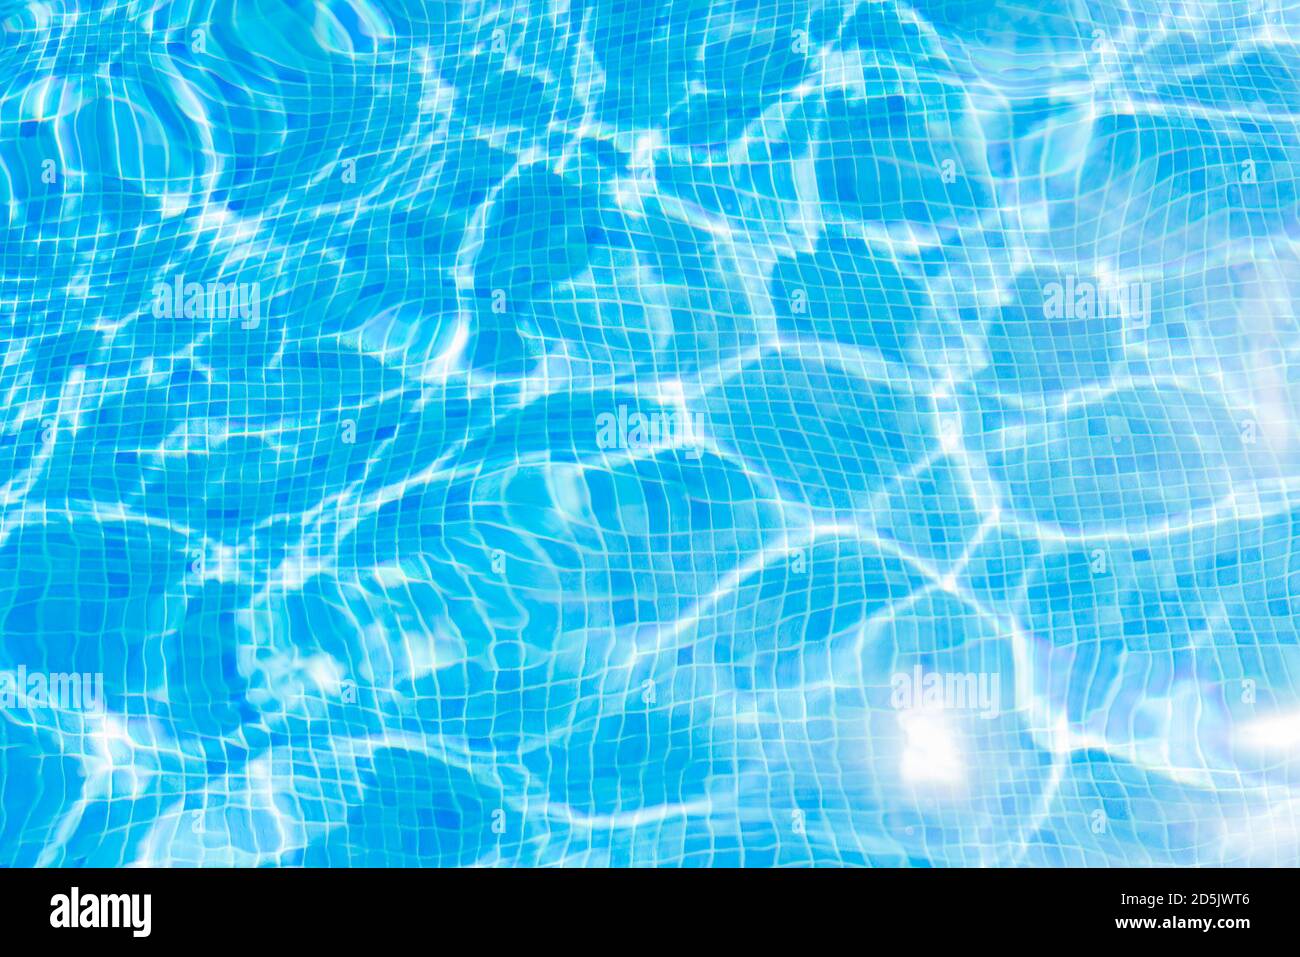 surface of blue swimming pool,background of water in swimming pool. Stock Photo